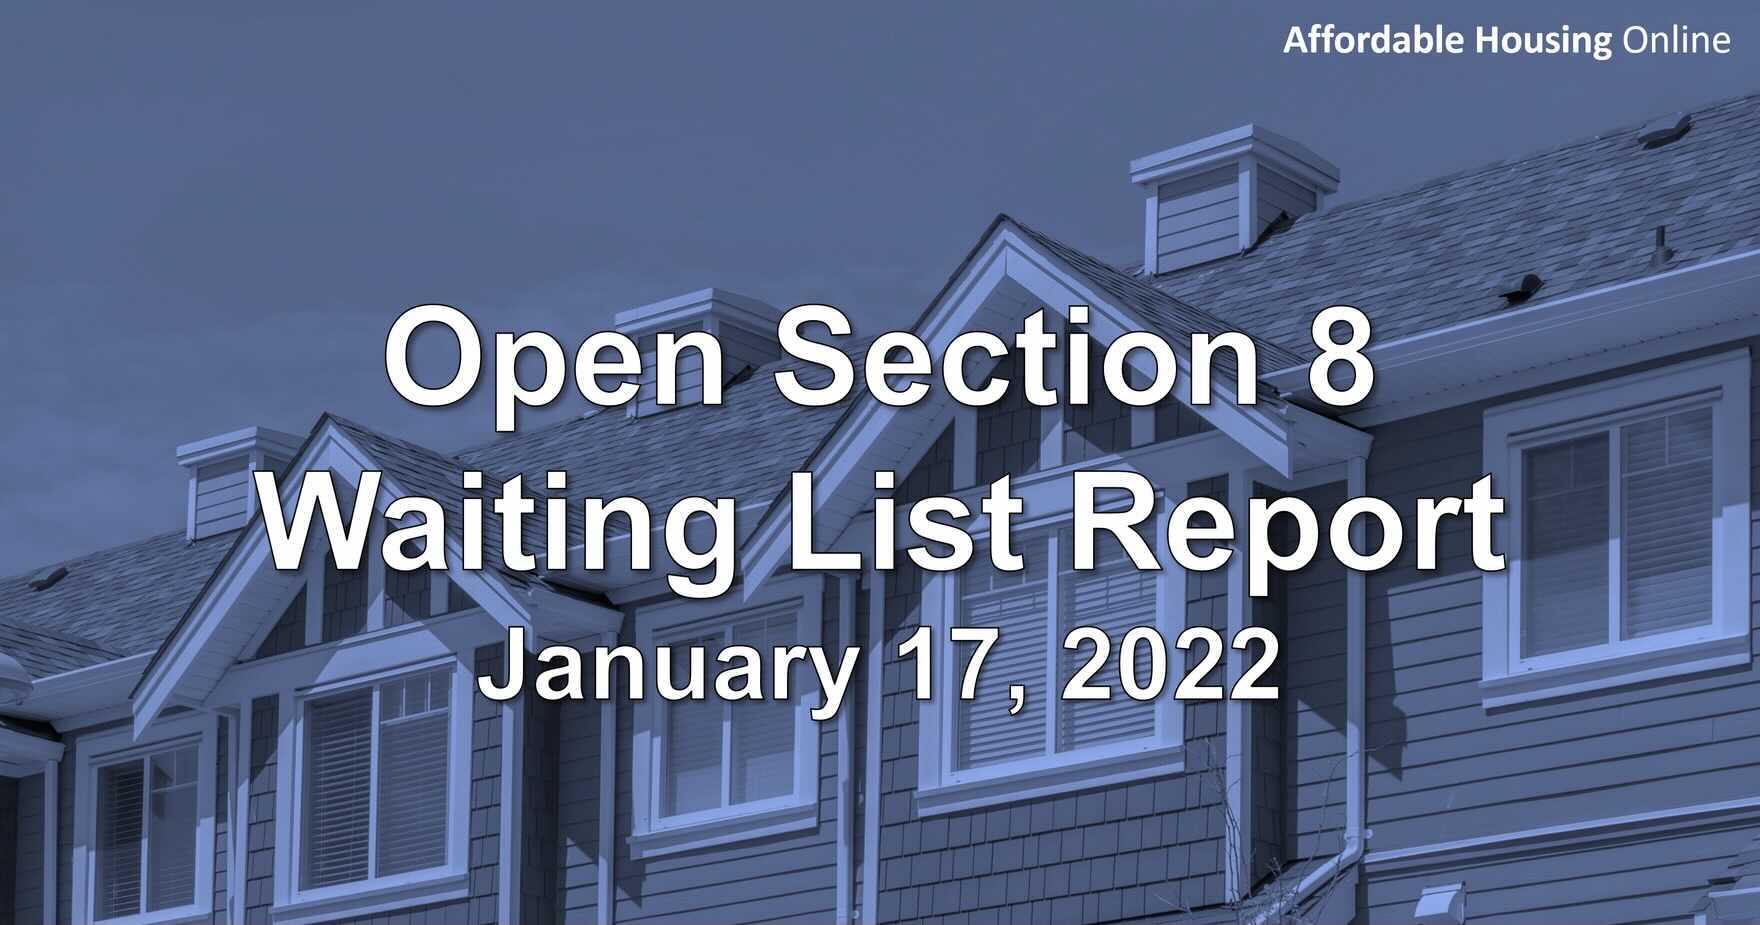 Open Section 8 Waiting List Report Banner image for January 17, 2022